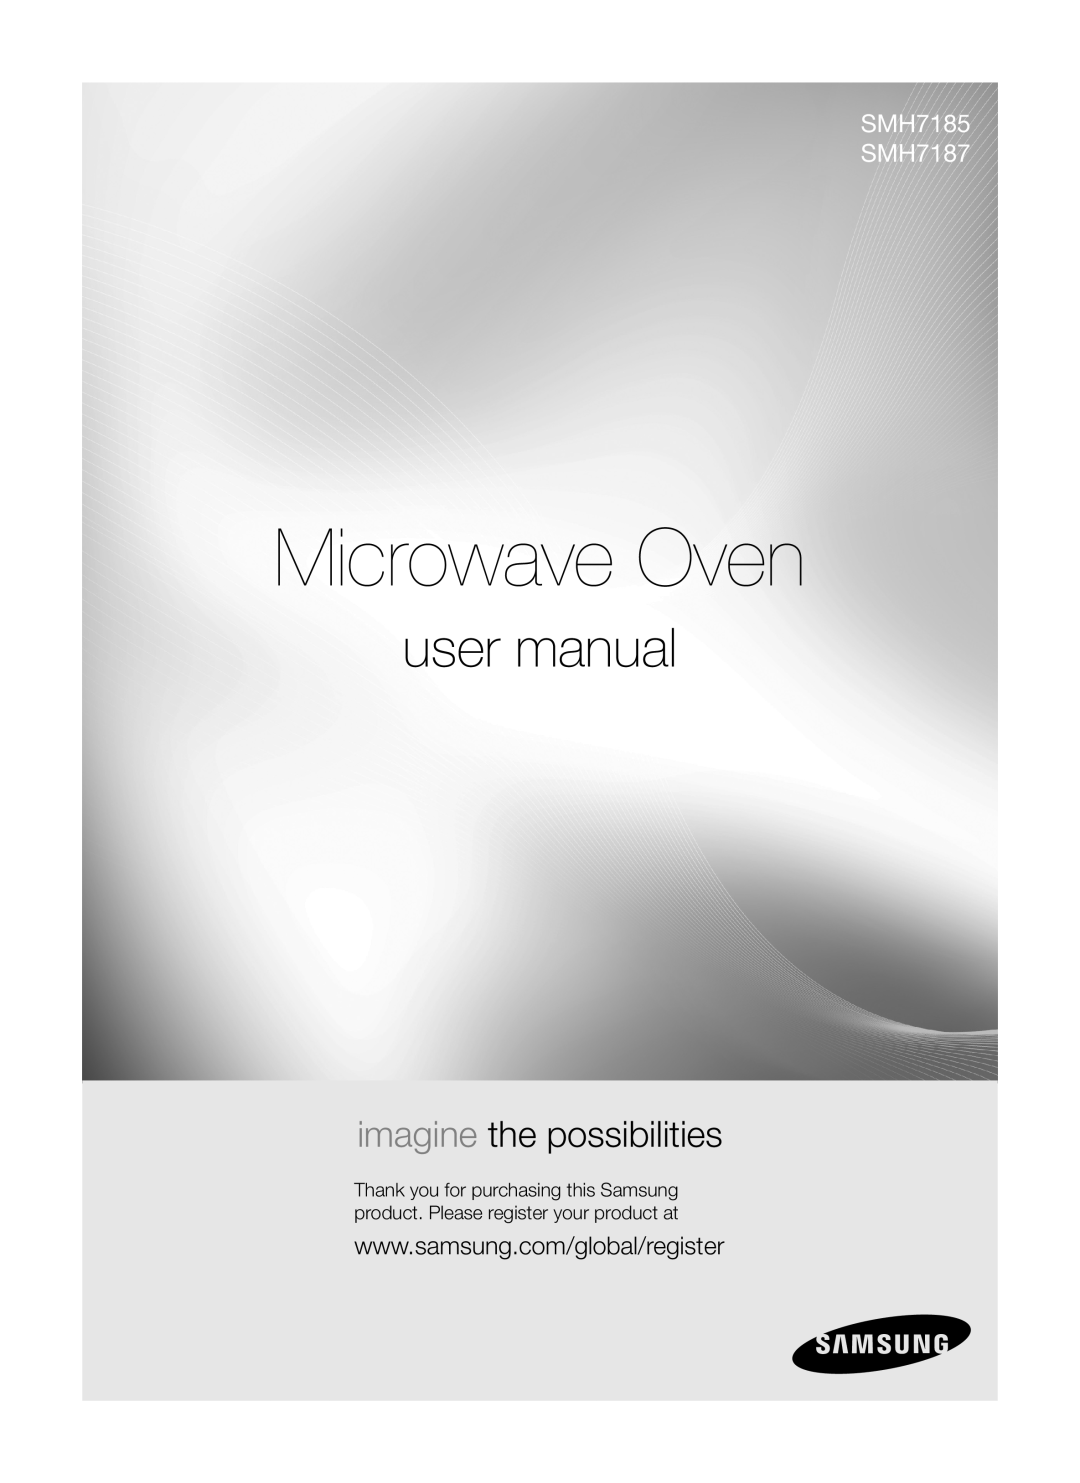 Samsung user manual imagine the possibilities, Microwave Oven, SMH7185 SMH7187 